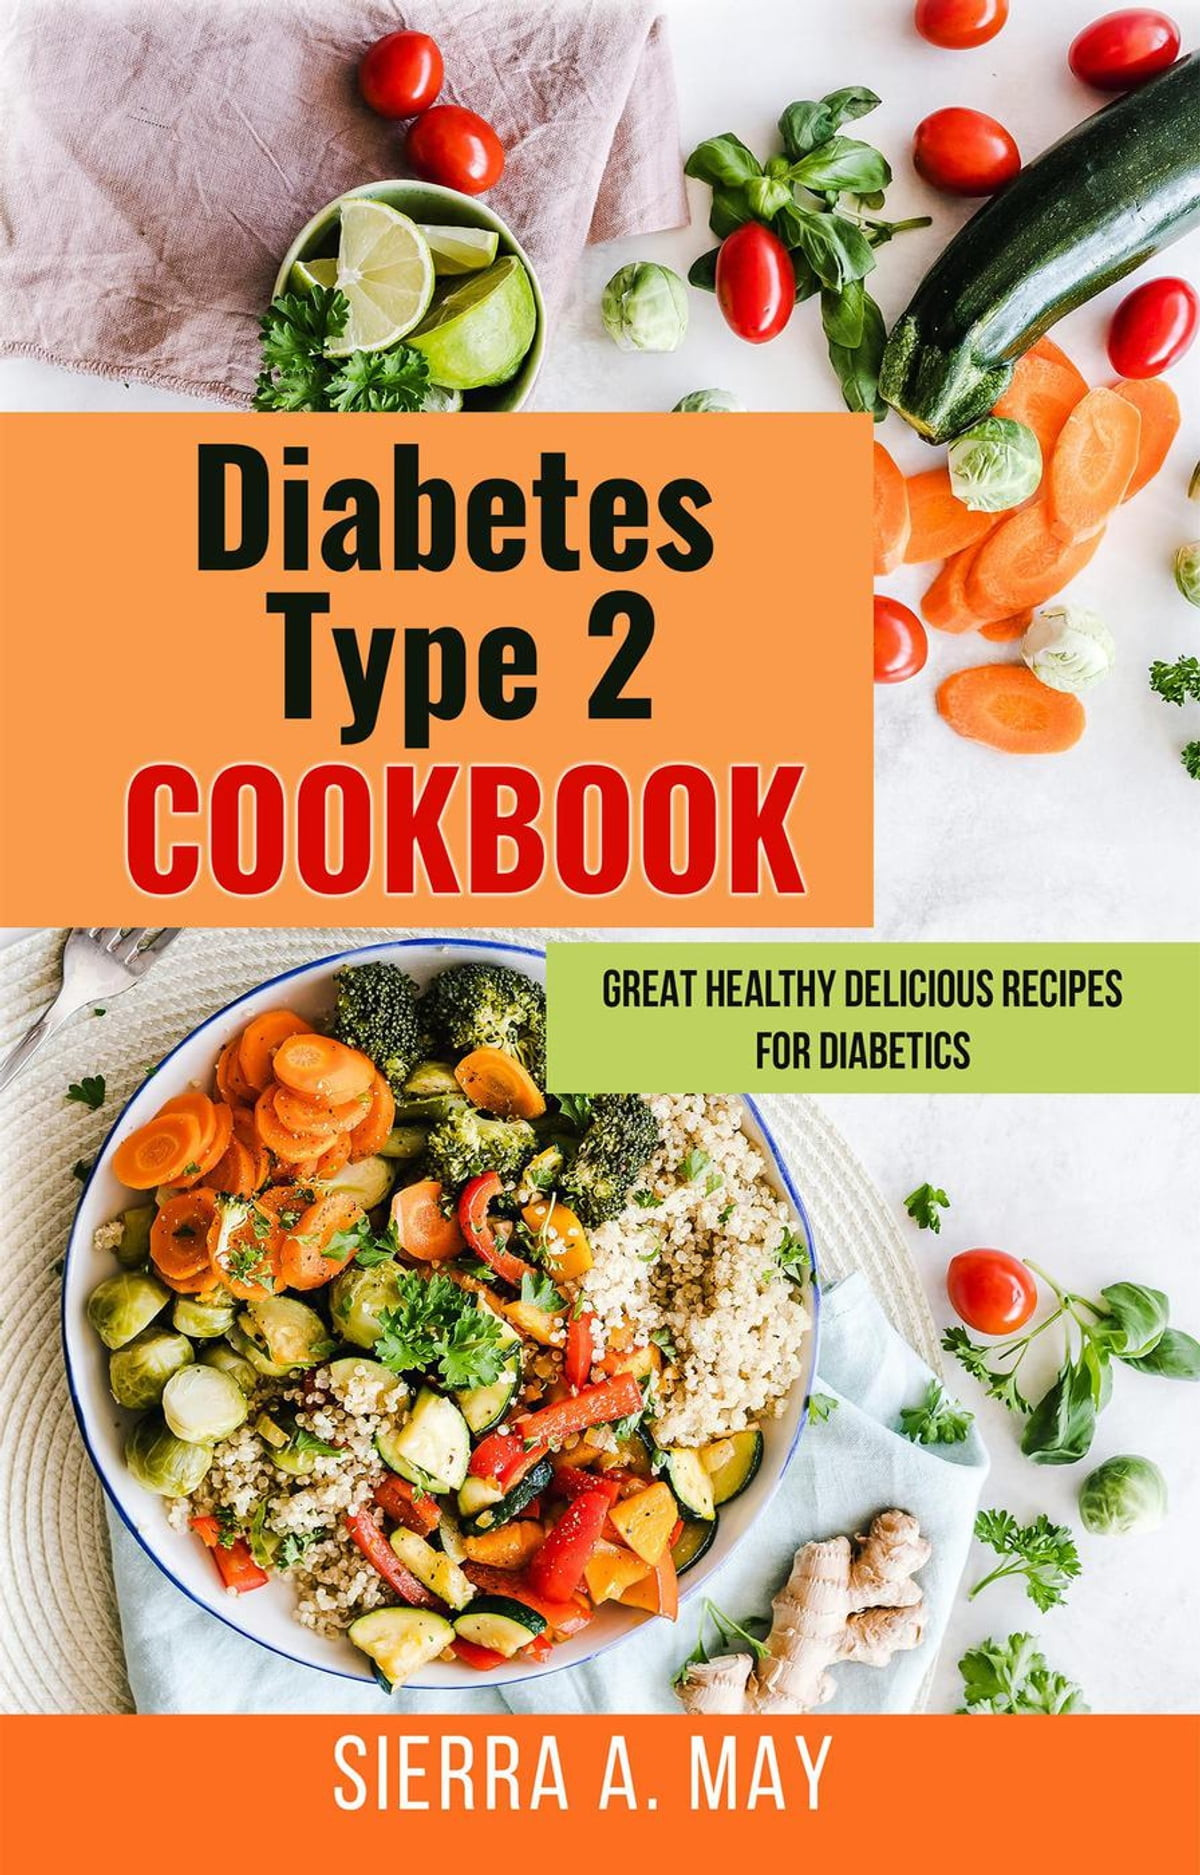 Diabetic Recipes for Two Elegant Diabetes Type 2 Cookbook Great Healthy Delicious Recipes